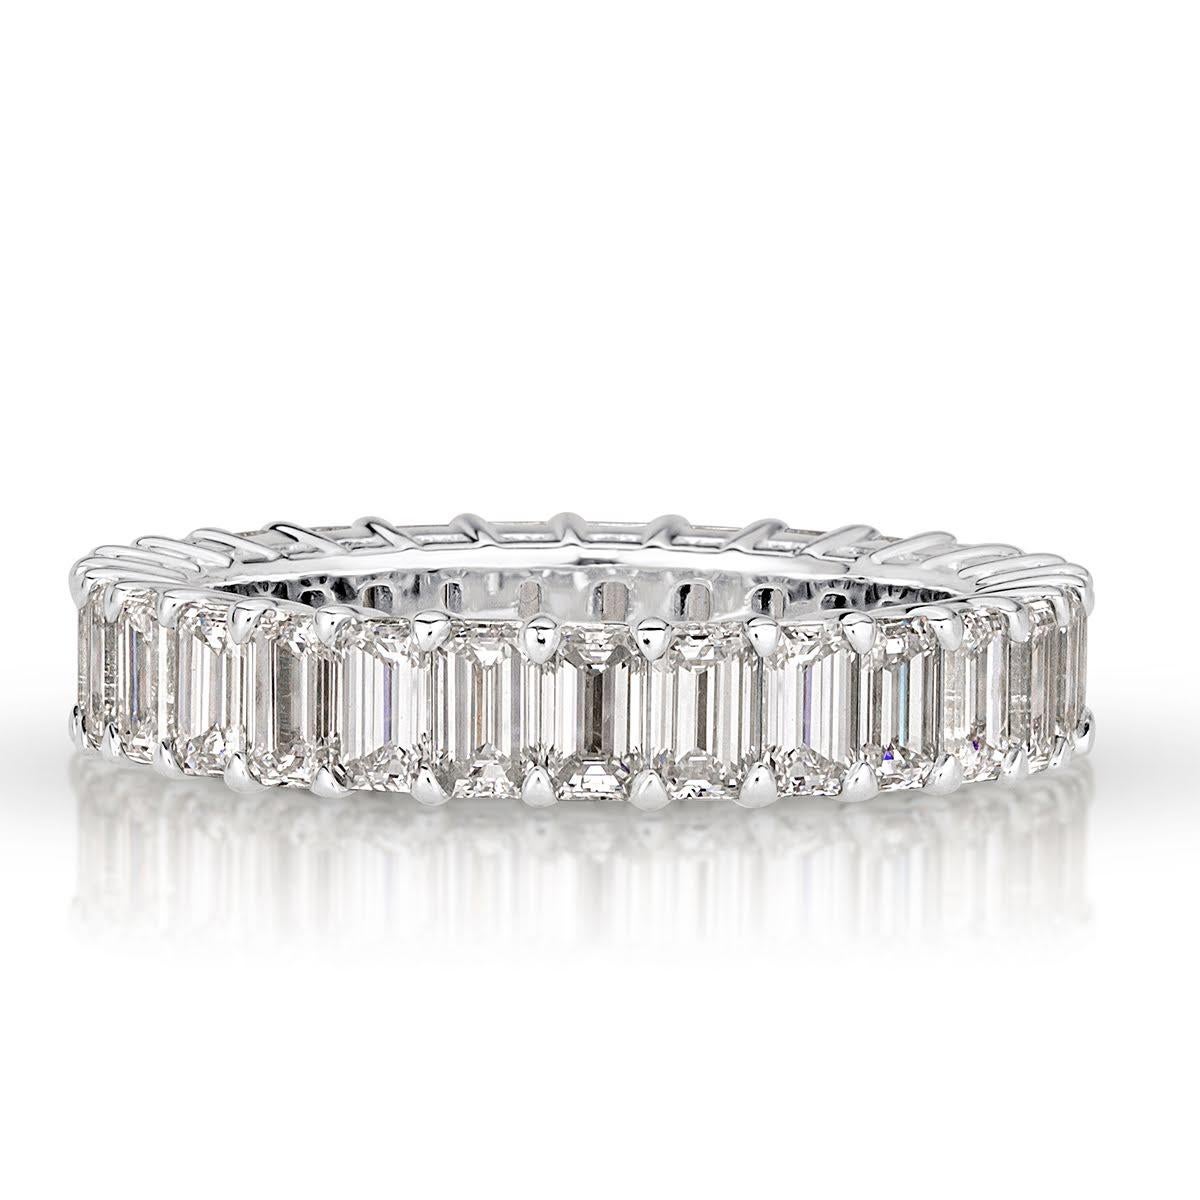 Handcrafted in high polish platinum, this stunning emerald cut diamond eternity band showcases 3.60ct of perfectly matched emerald cut diamonds graded at E-F in color, VVS2-VS1 in clarity. All eternity bands are shown in a size 6.5. We custom craft